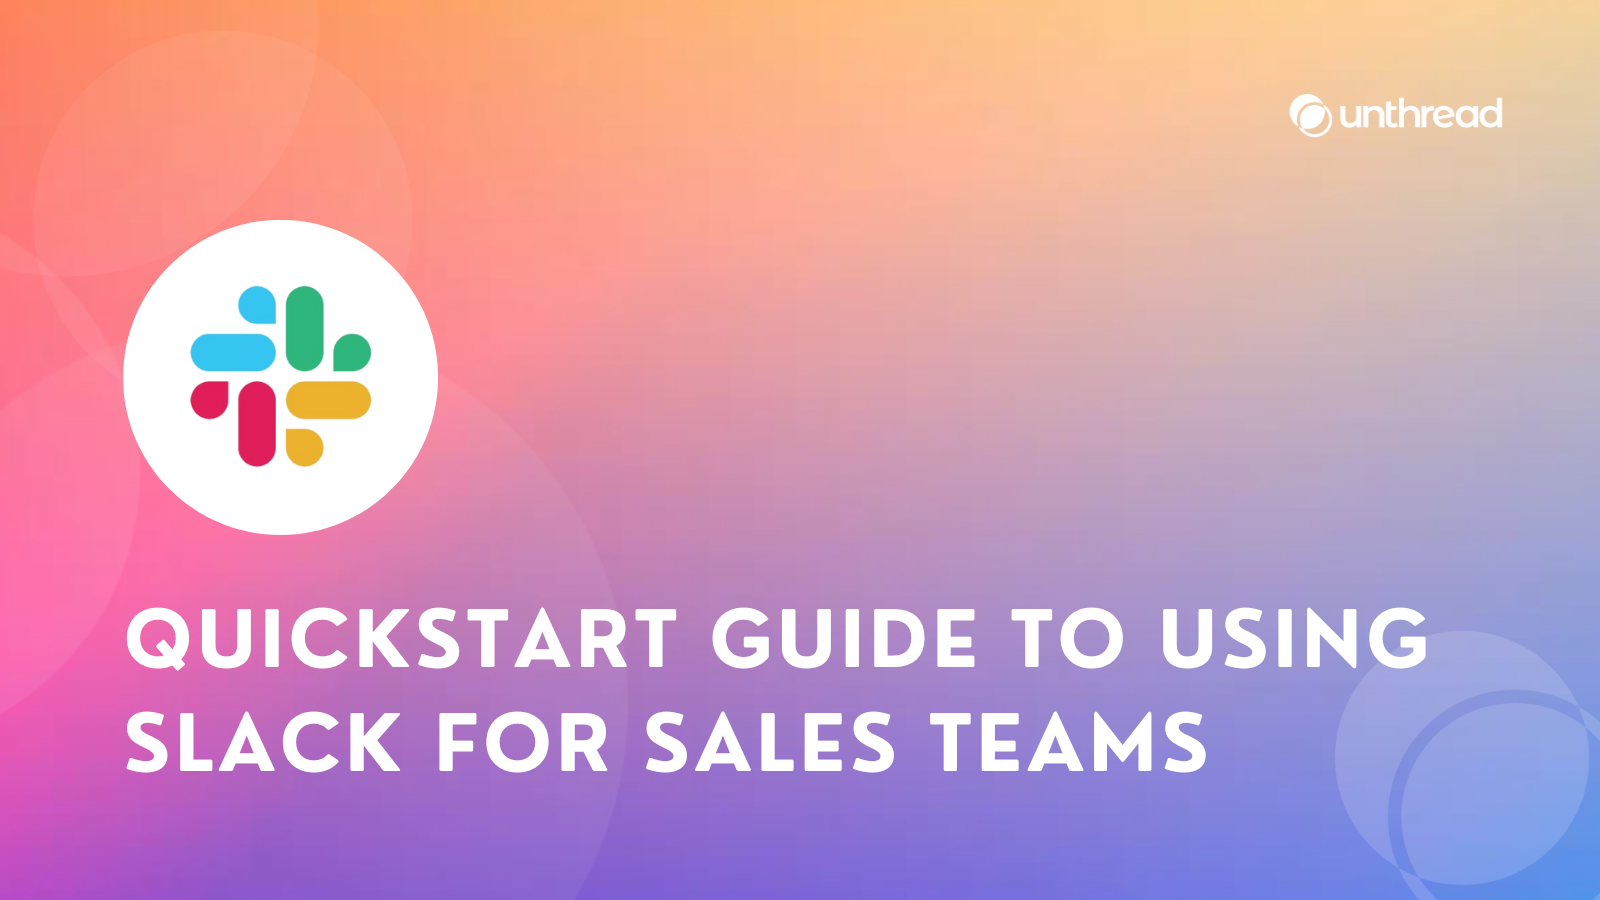 Quickstart Guide to Using Slack for Sales Teams